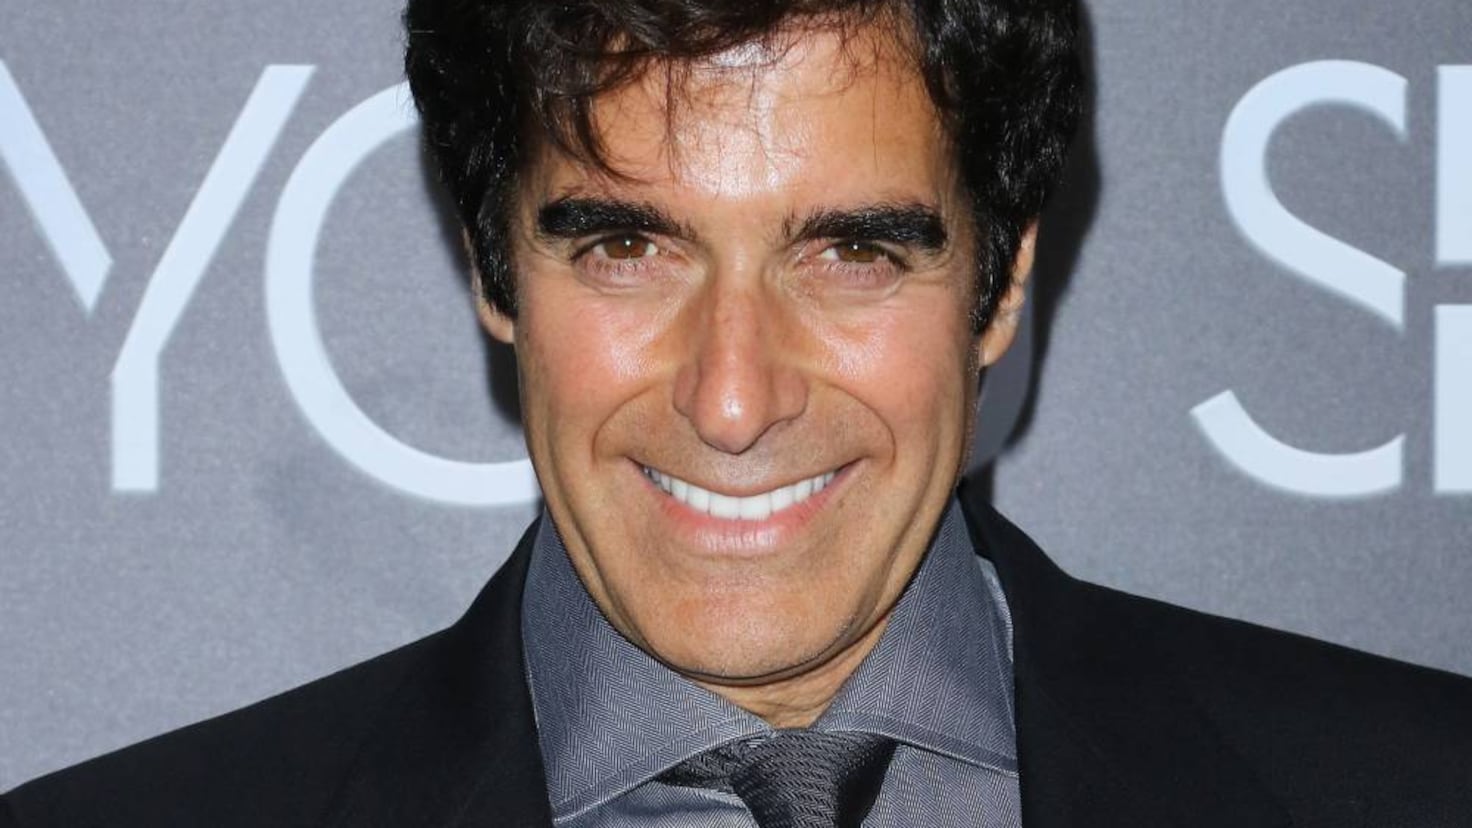 David Copperfield, accused of sexual assault by 16 women
